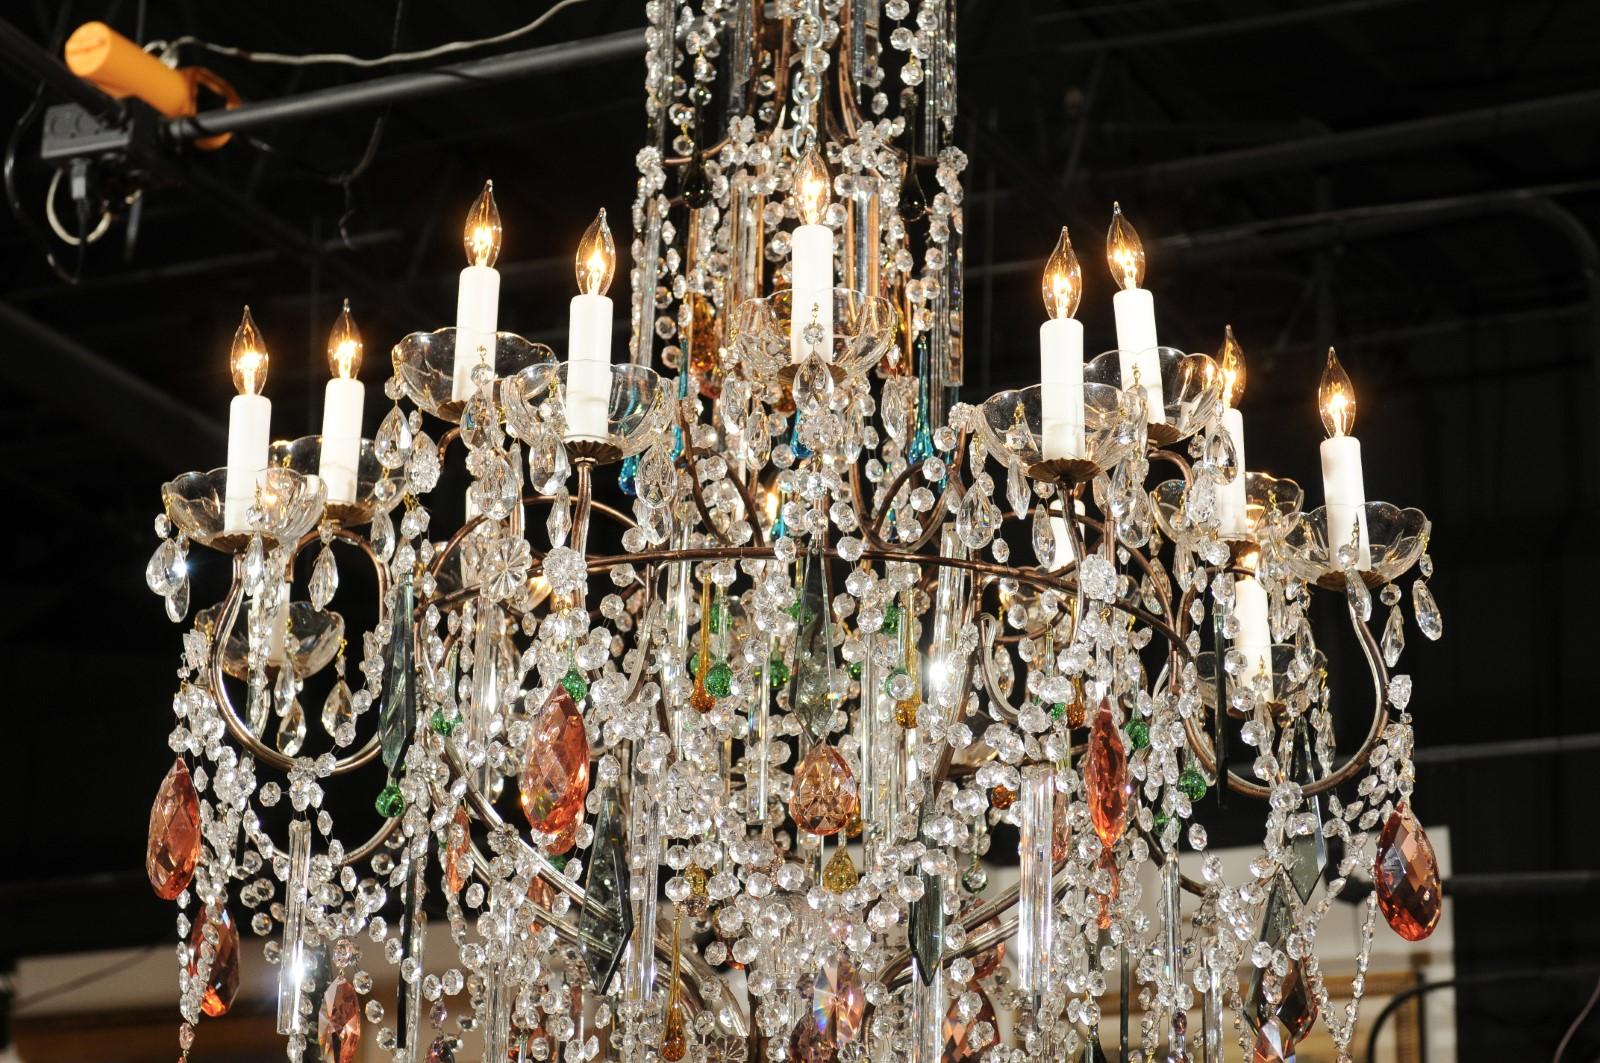 Vintage Florentine Midcentury 16-Light Chandelier Draped with Colorful Crystals 1